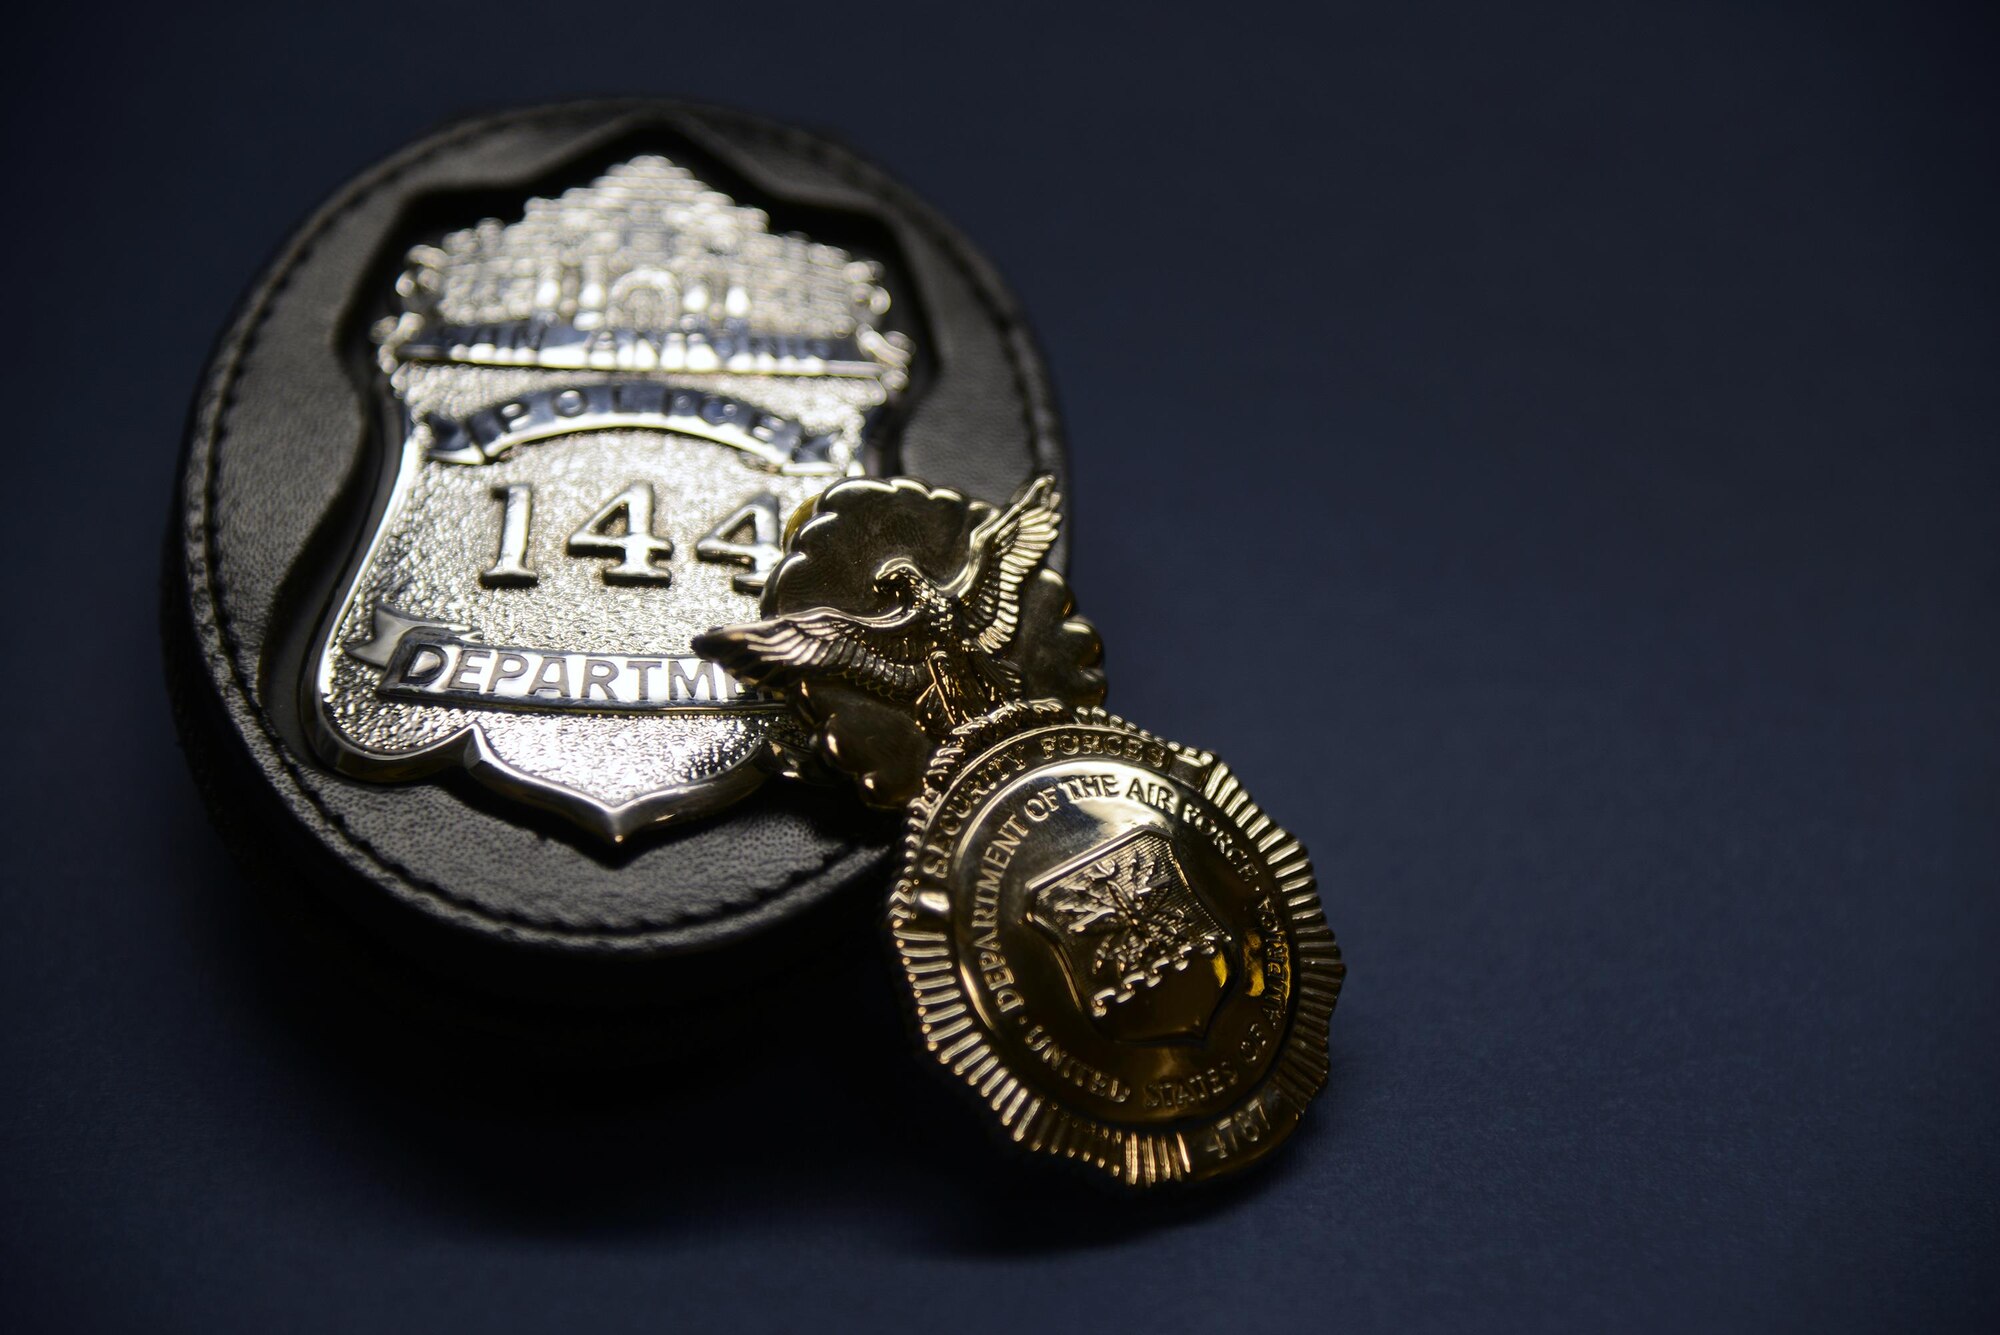 An Air Force Security Police Badge rests against a San Antonio Police Department badge on Laughlin Air Force Base, Texas, July 8, 2015. The badges belong to Christopher Enfinger who serves as a patrol officer assigned to the SAPD Gang Unit, as well as a Master Sgt. assigned to the Air Force Reserves currently stationed at the 47th Security Forces Squadron here. (U.S. Air Force photo by Tech Sgt. Steven R. Doty)